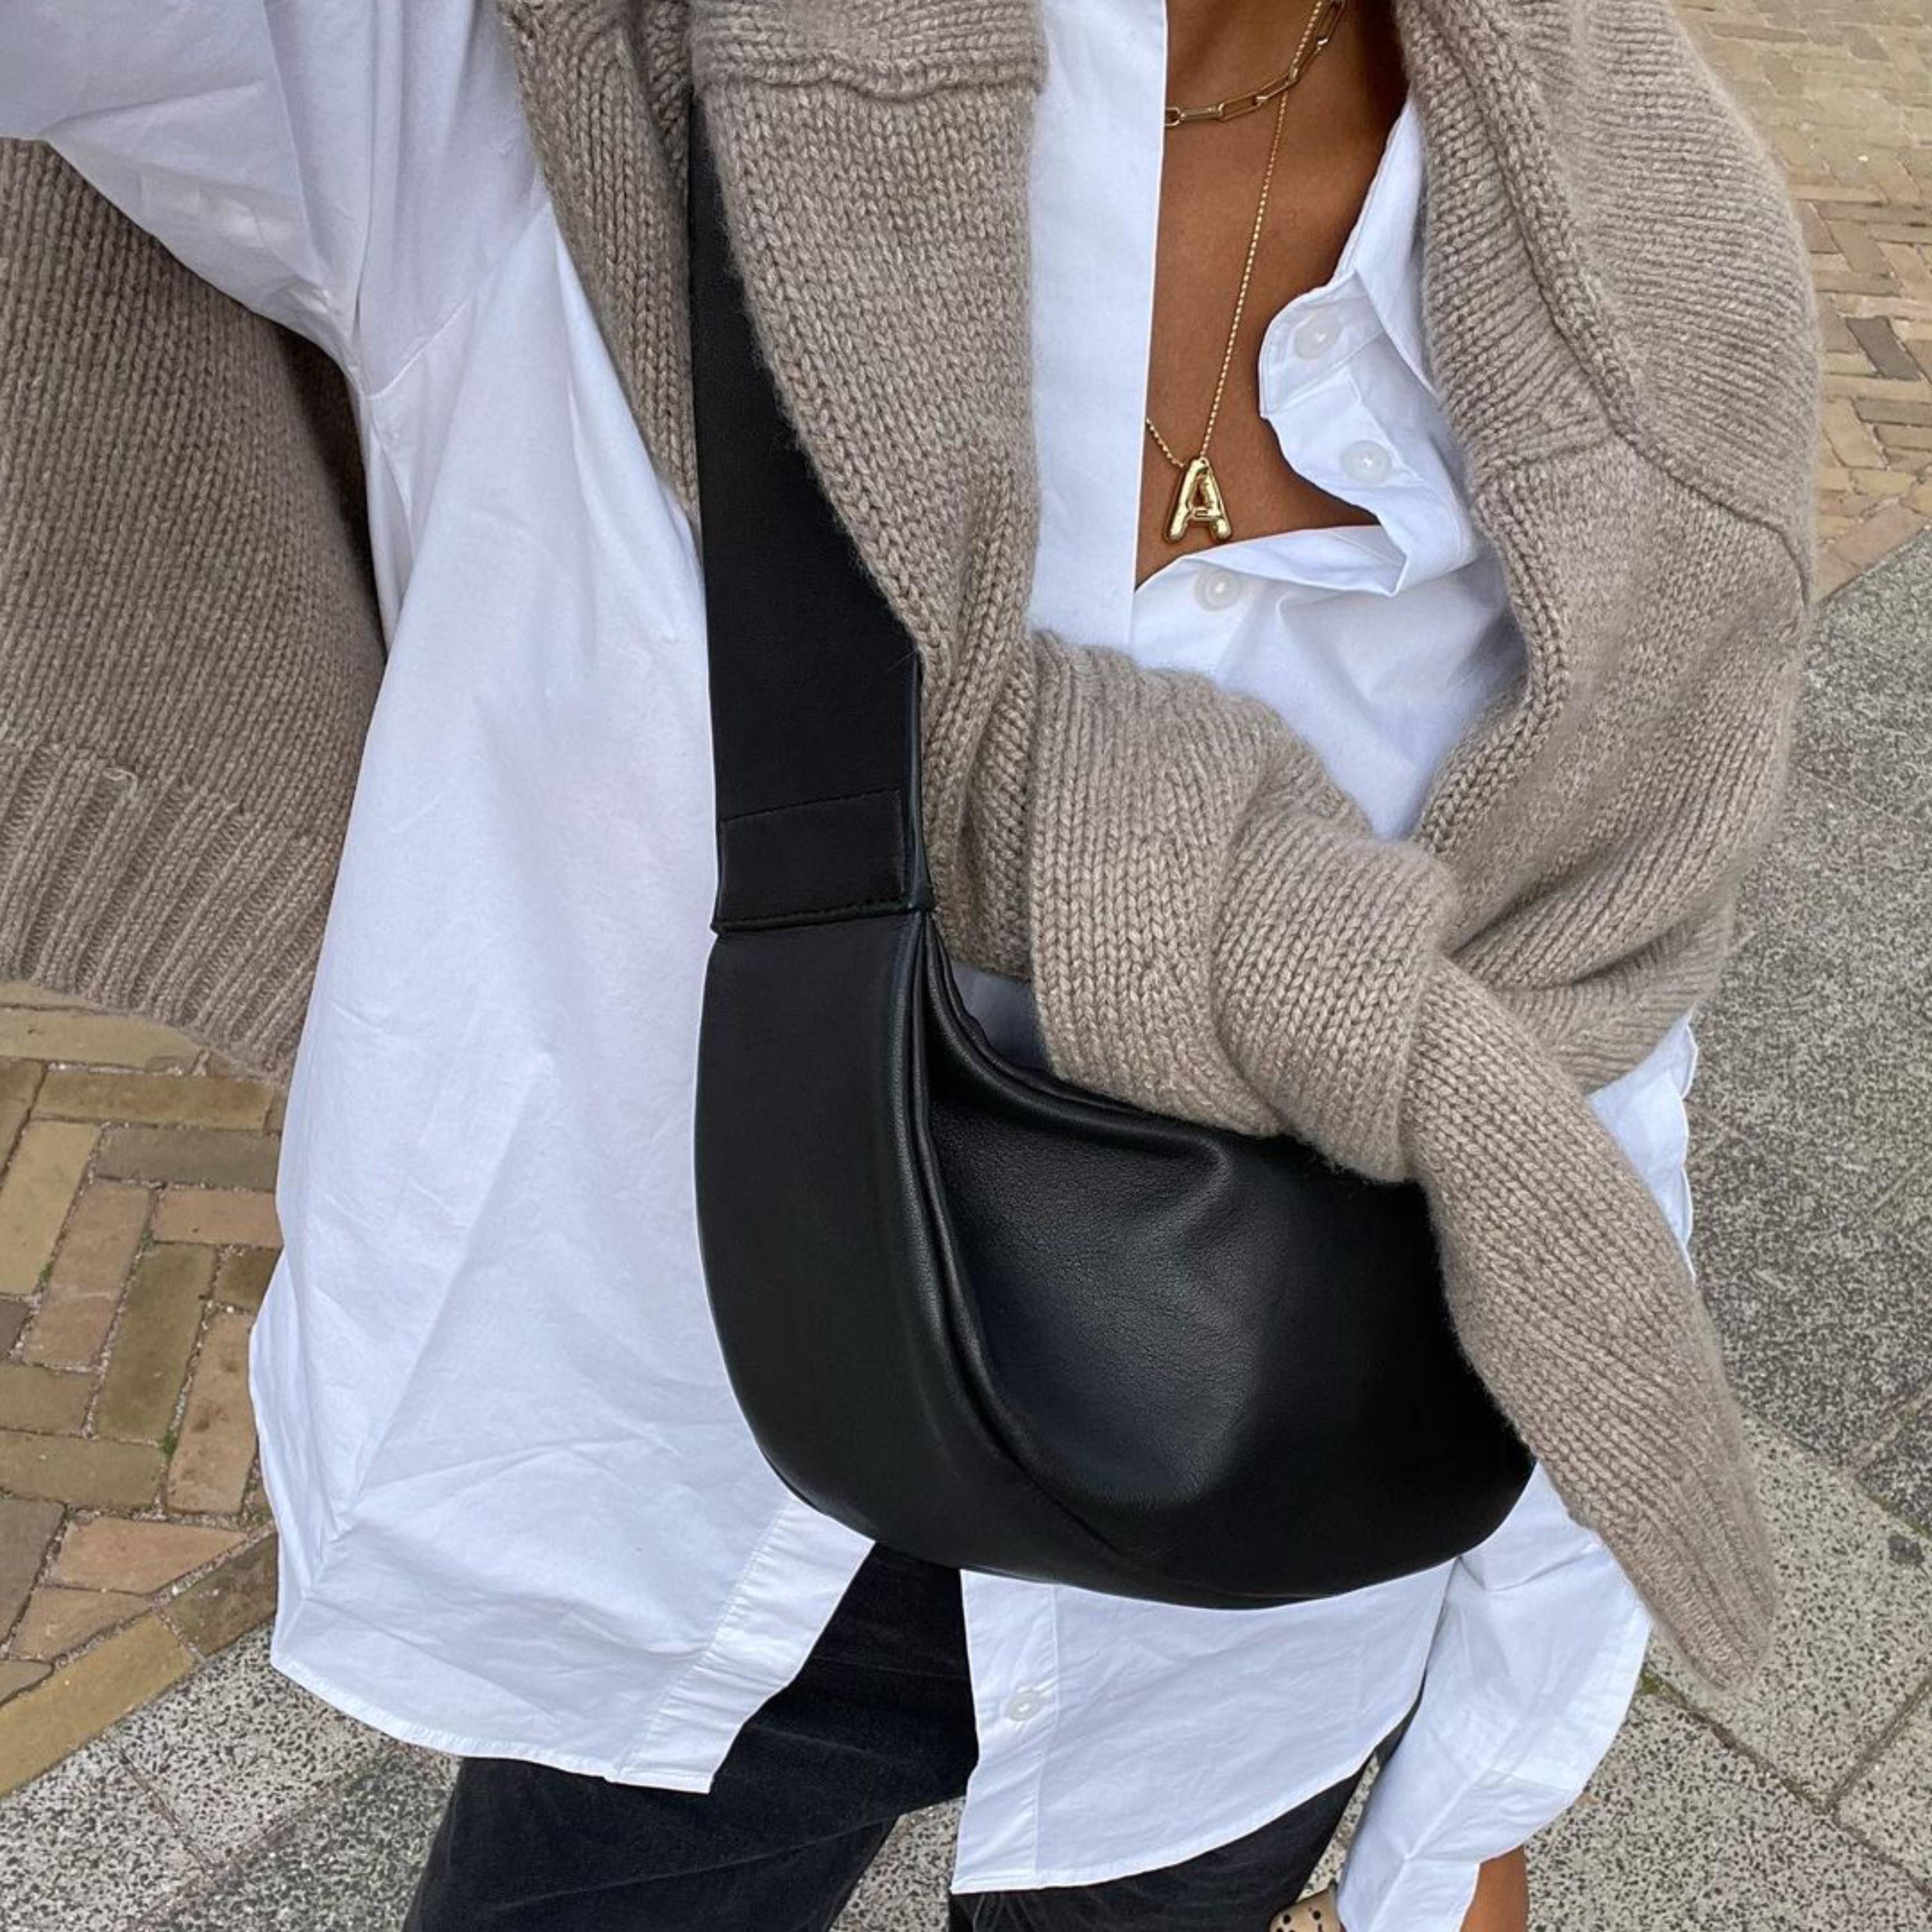 Prime Day Deal: Long Cardigan Jacket Fall Outfit